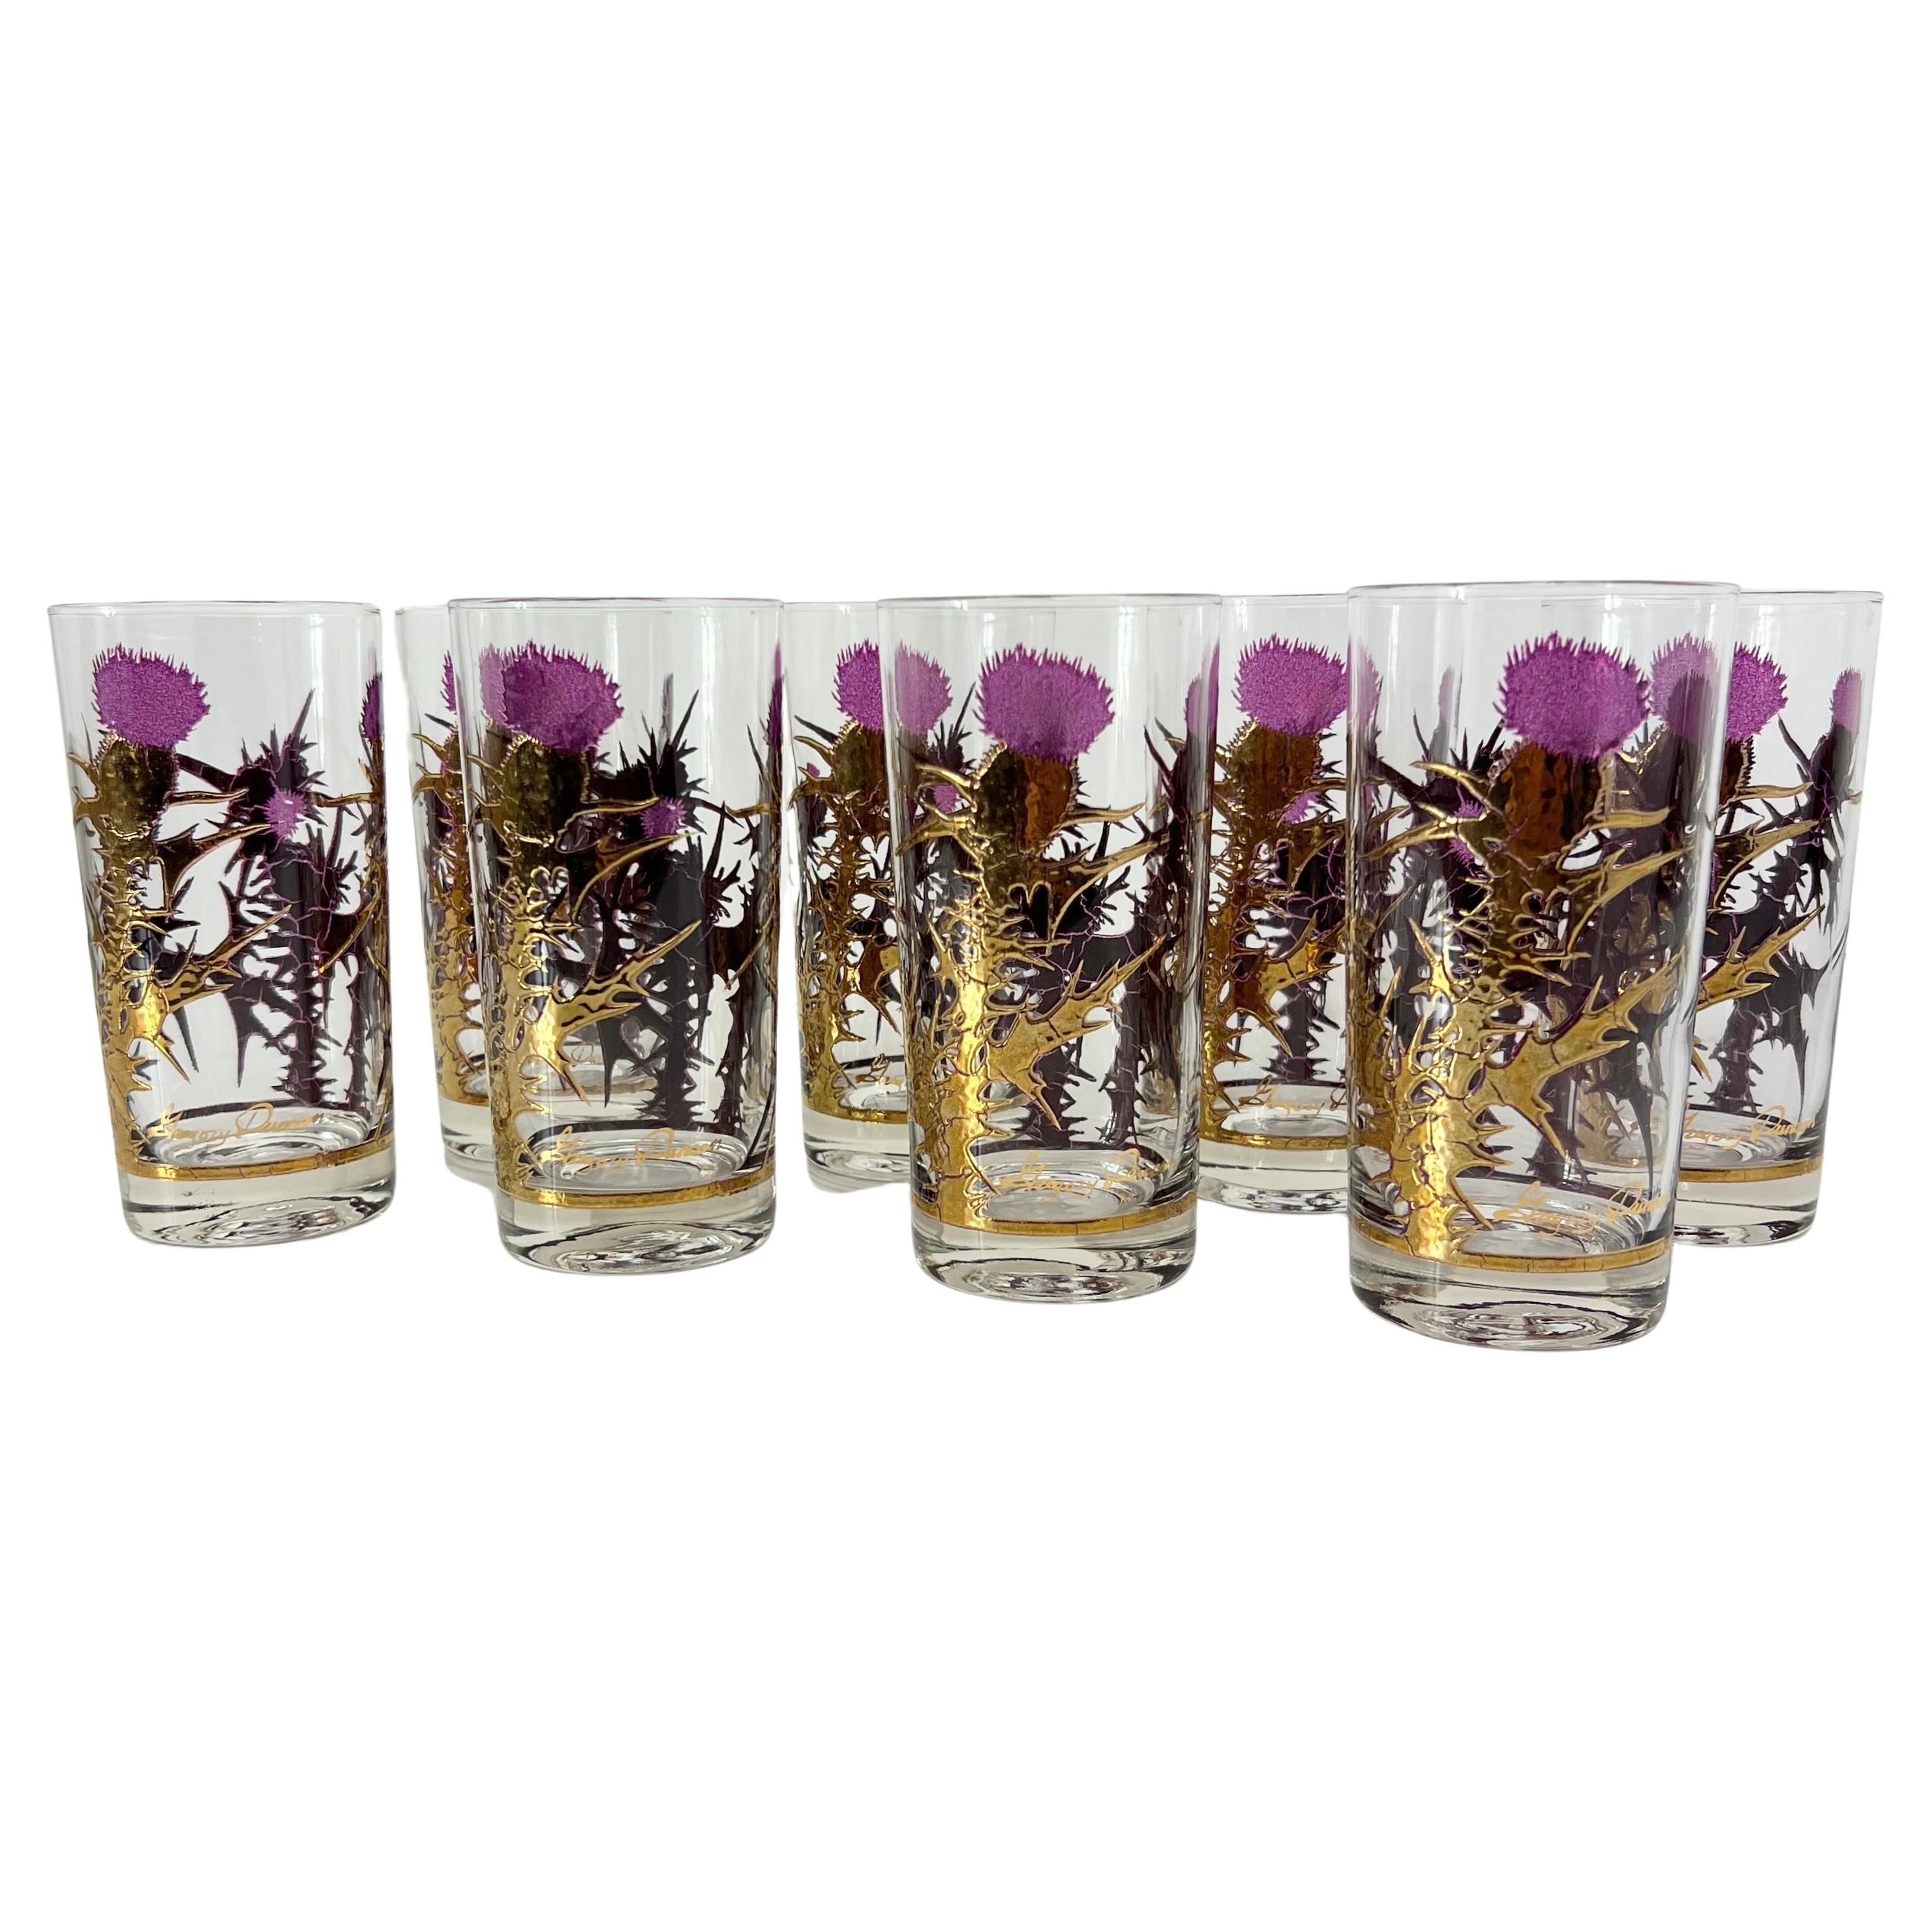 Mid Century 22K Gold Thistle Highball Glassware Set by Gregory Duncan - Set of 8 For Sale